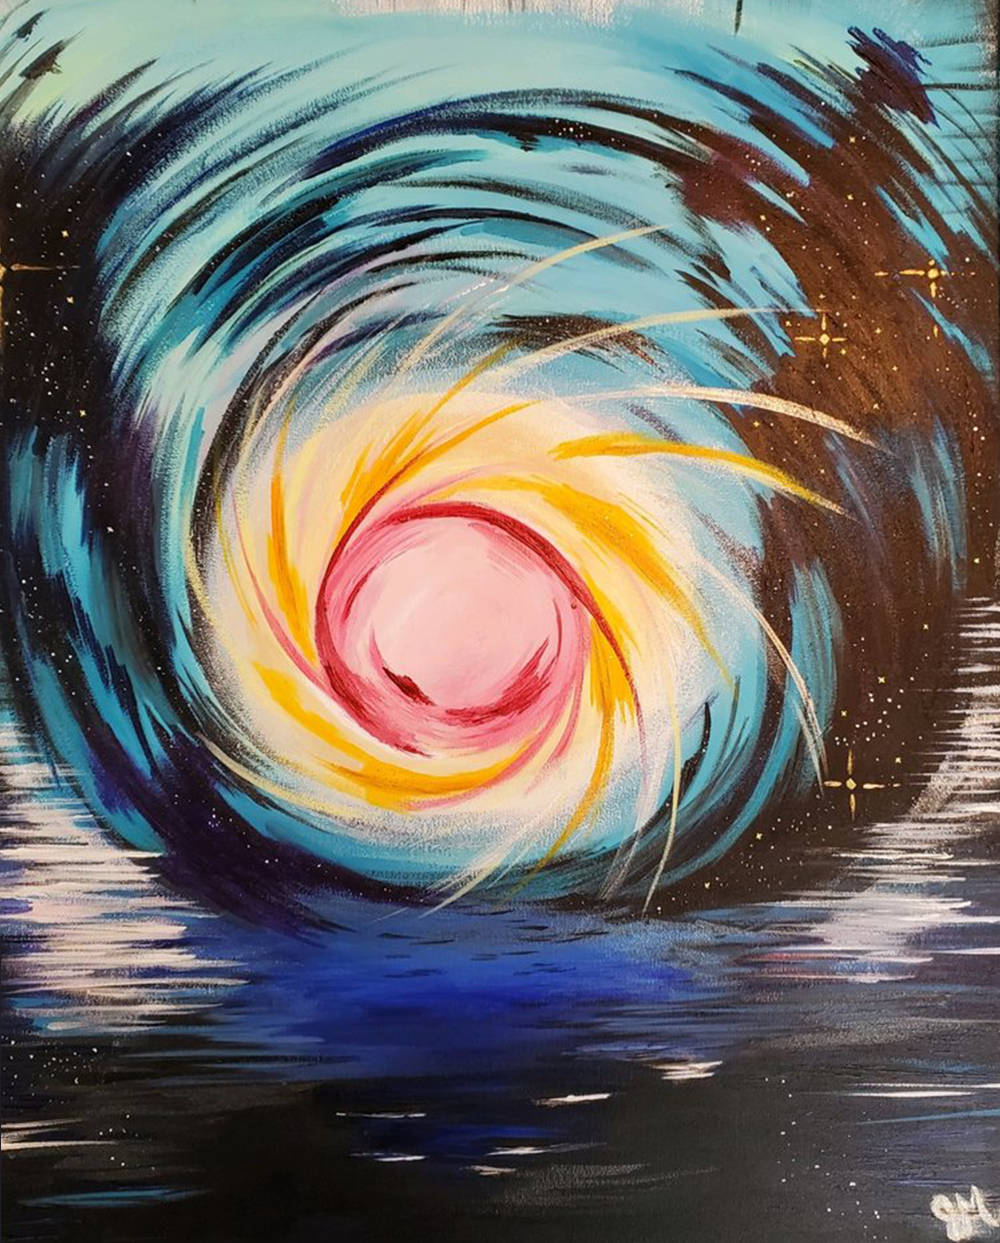 A bright whirling pink and yellow ball of light twisting around a blue background, twisting the water below and blue around it.